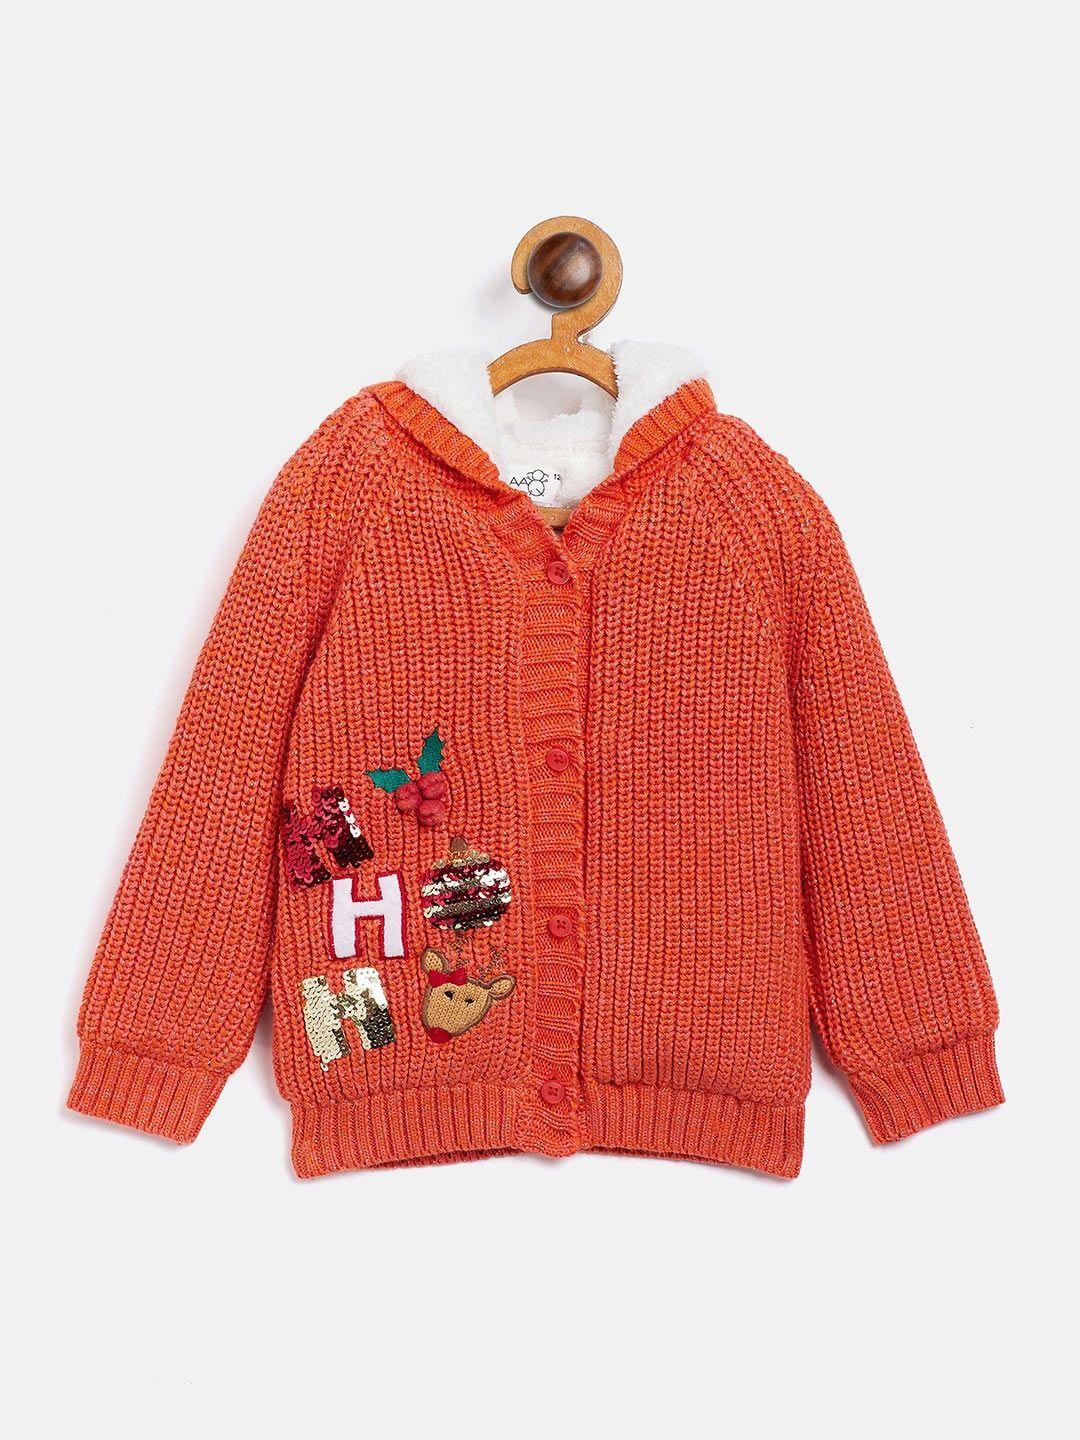 wildlinggs infants typography pure cotton cardigan with embroidered detail sweater